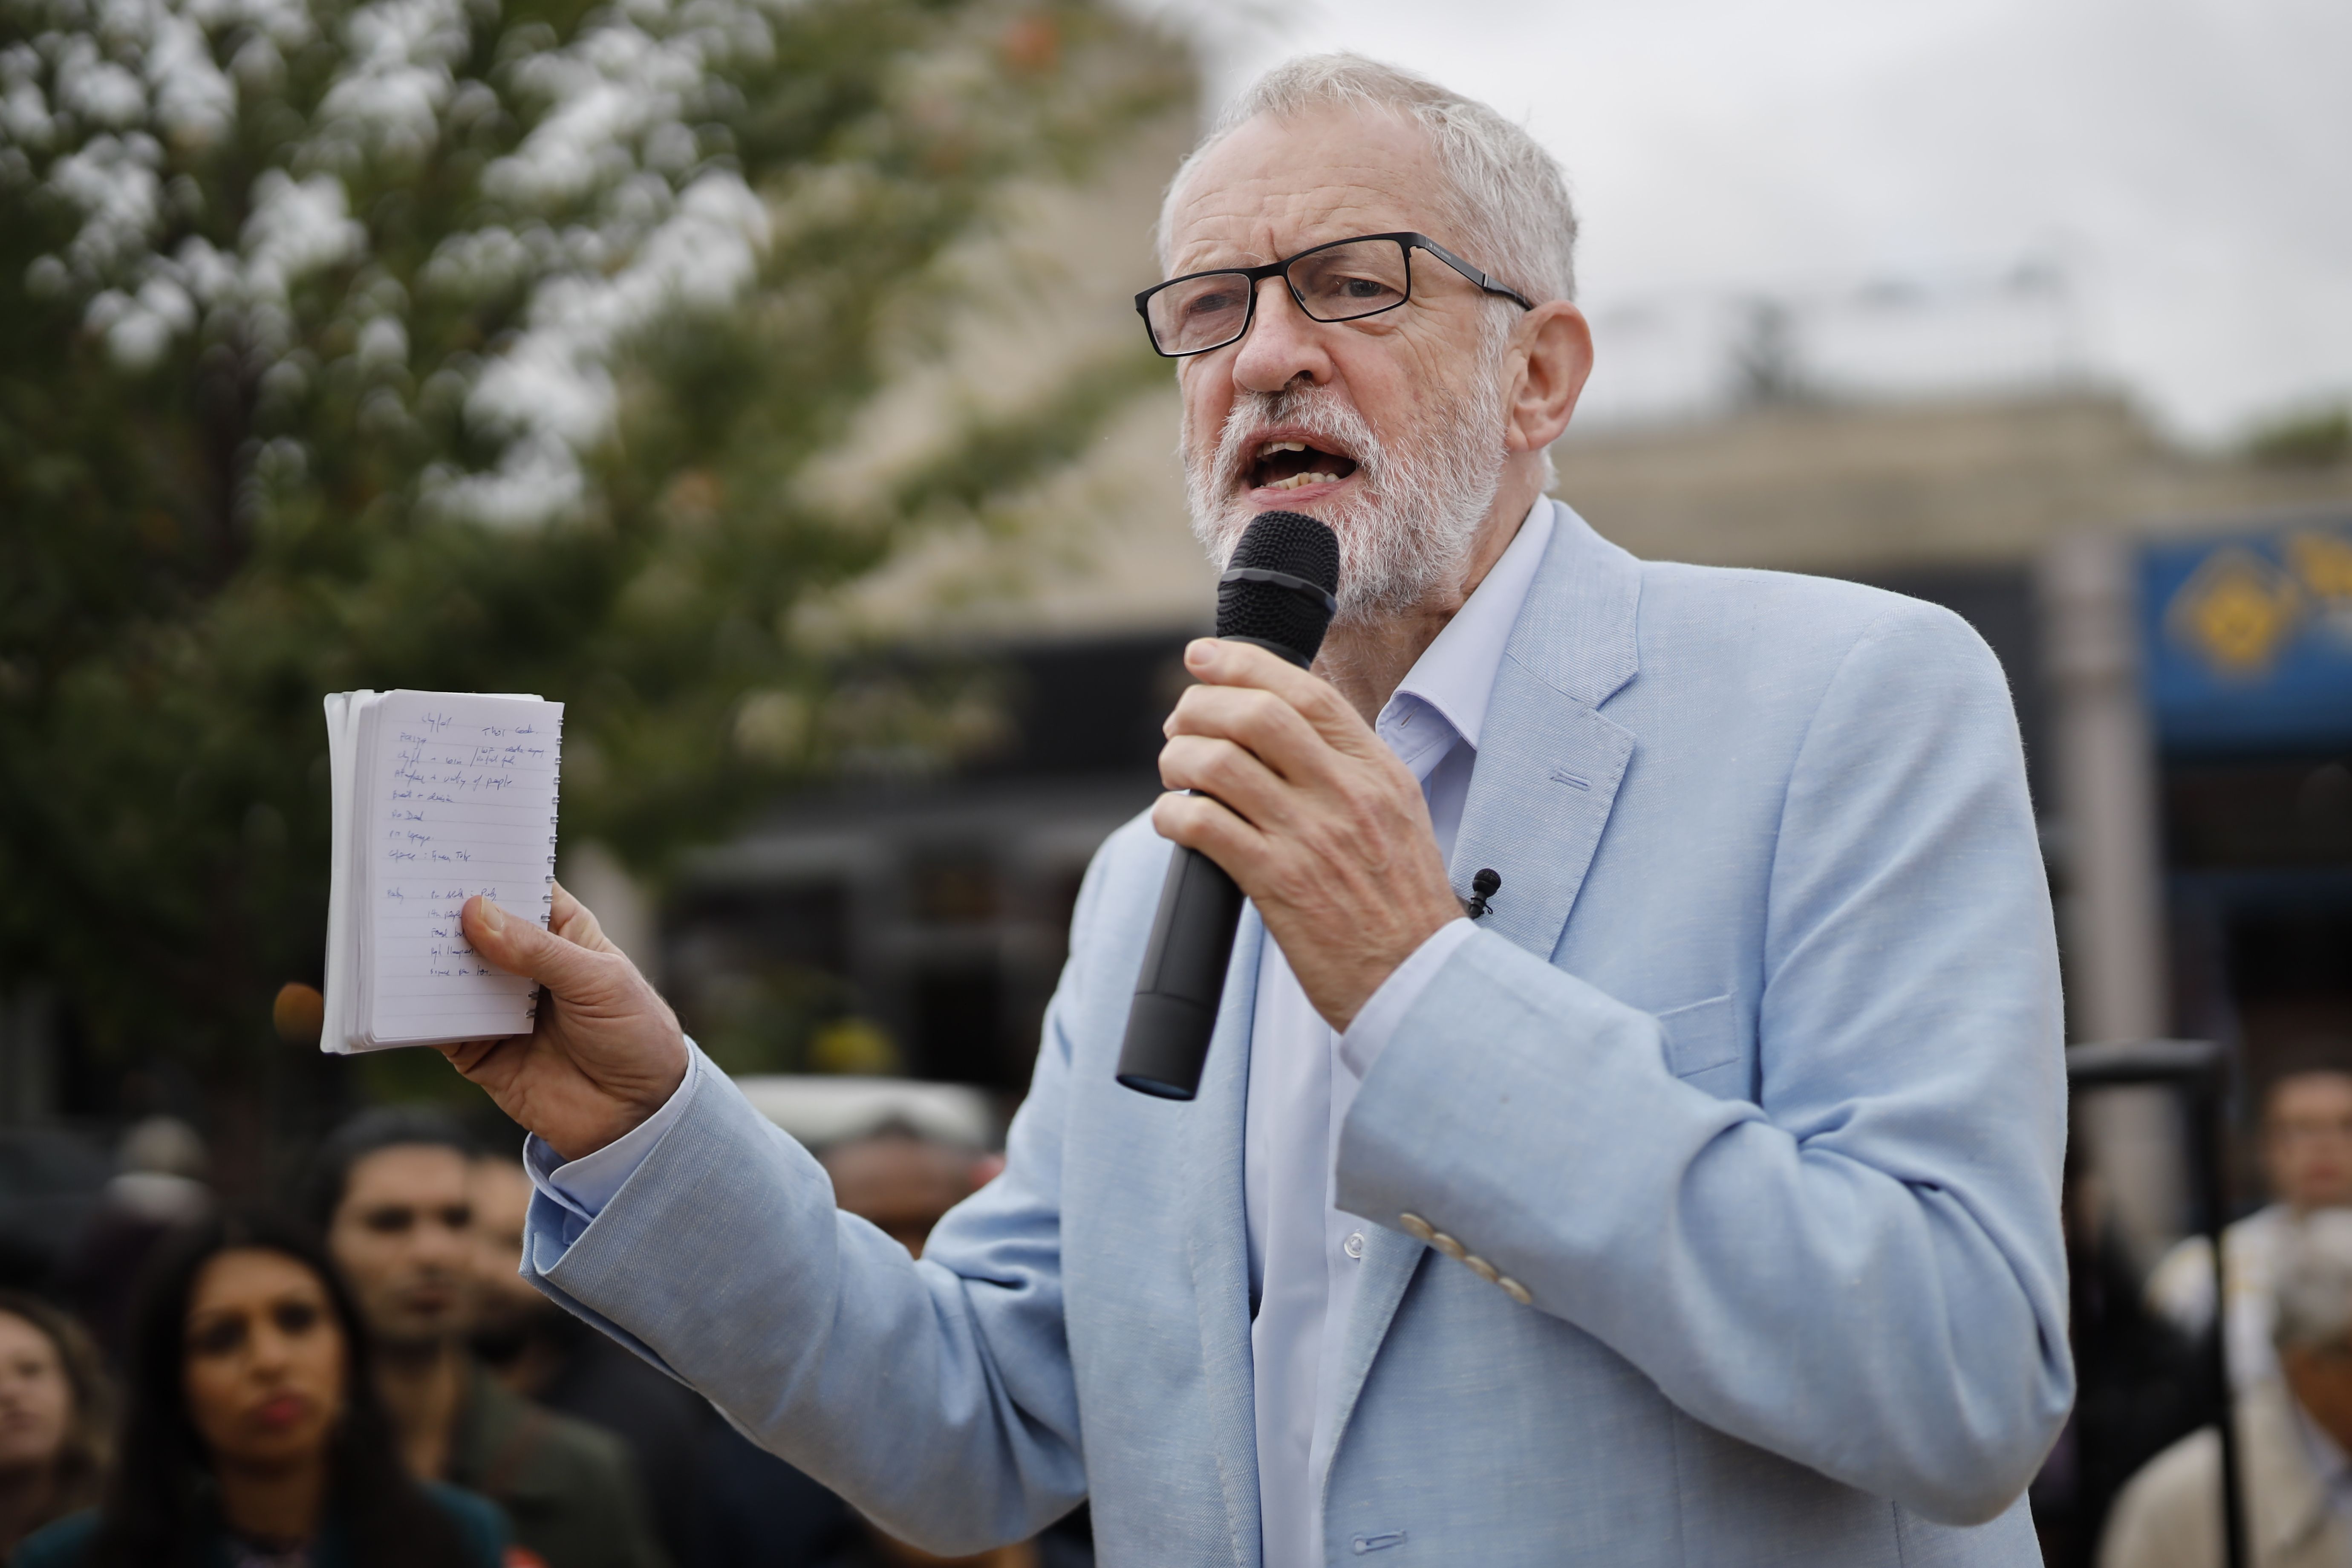 Jeremy Corbyn, opposition Labour Party leader